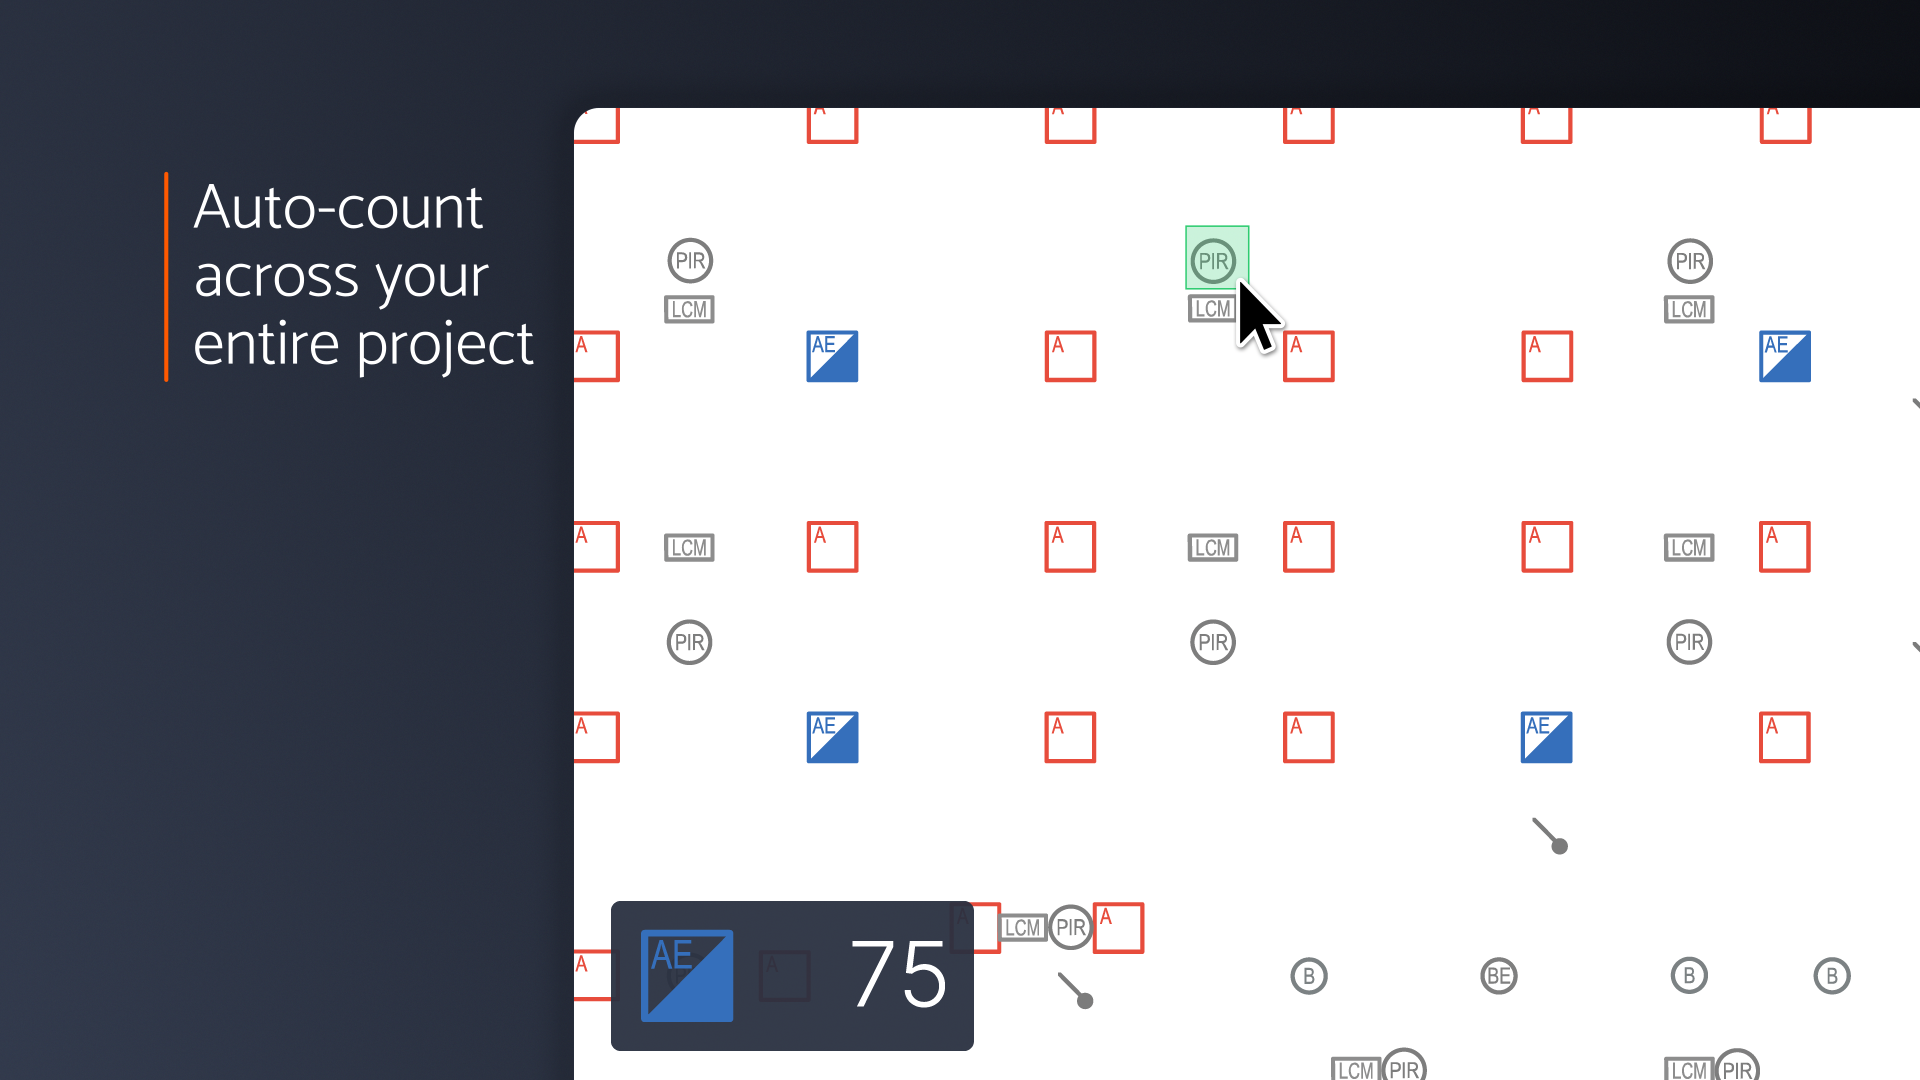 Auto-count across your entire project